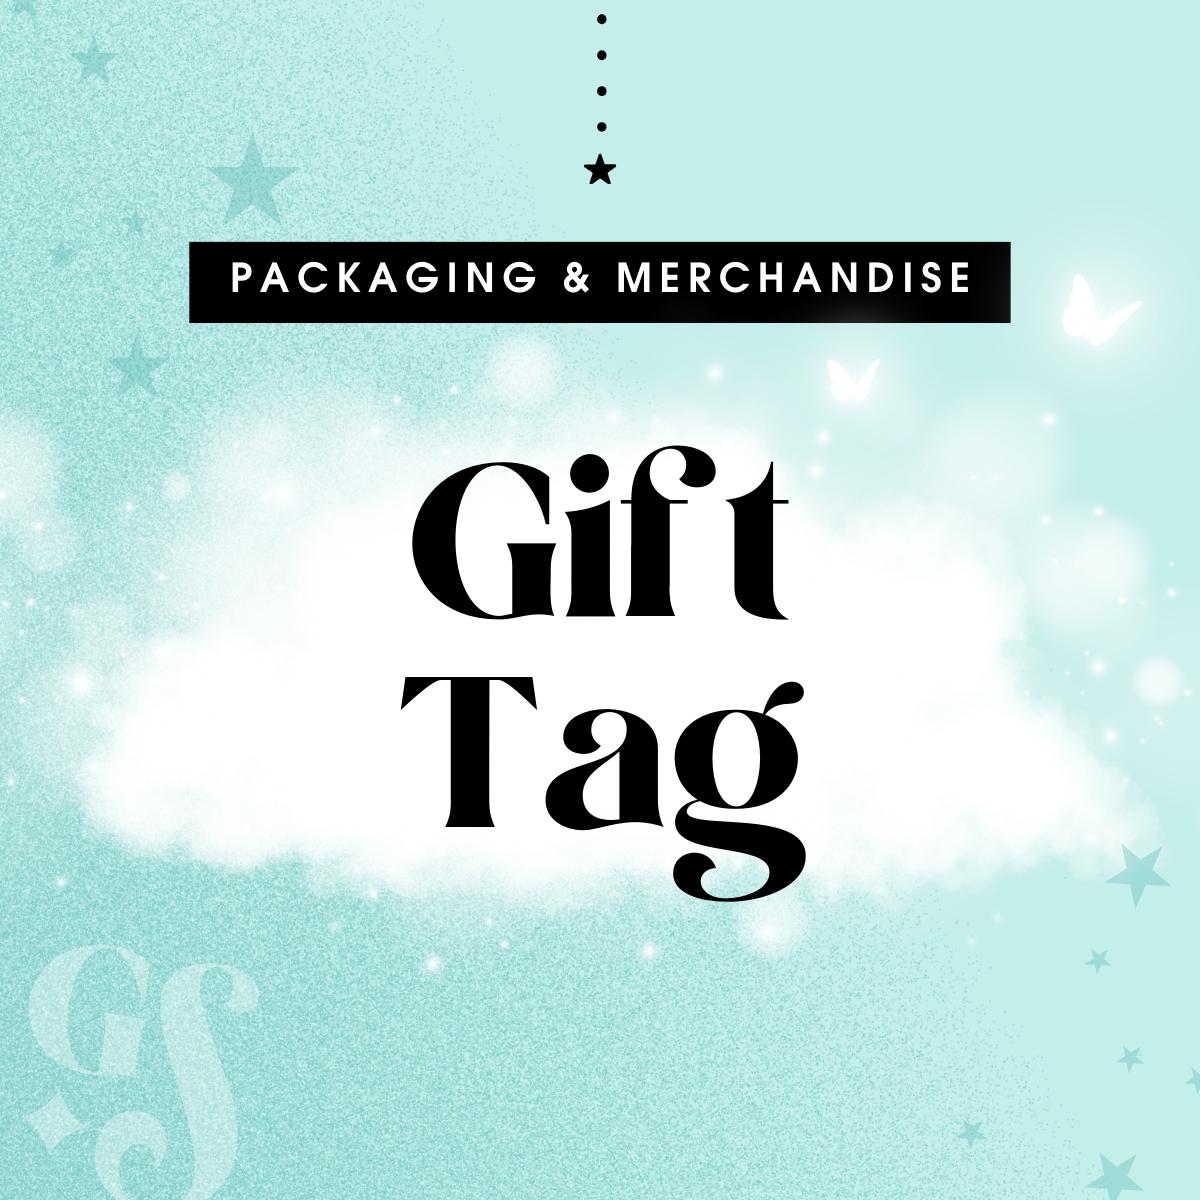 Gift Tag Design | Packaging & Merchandise | Infinity Creative